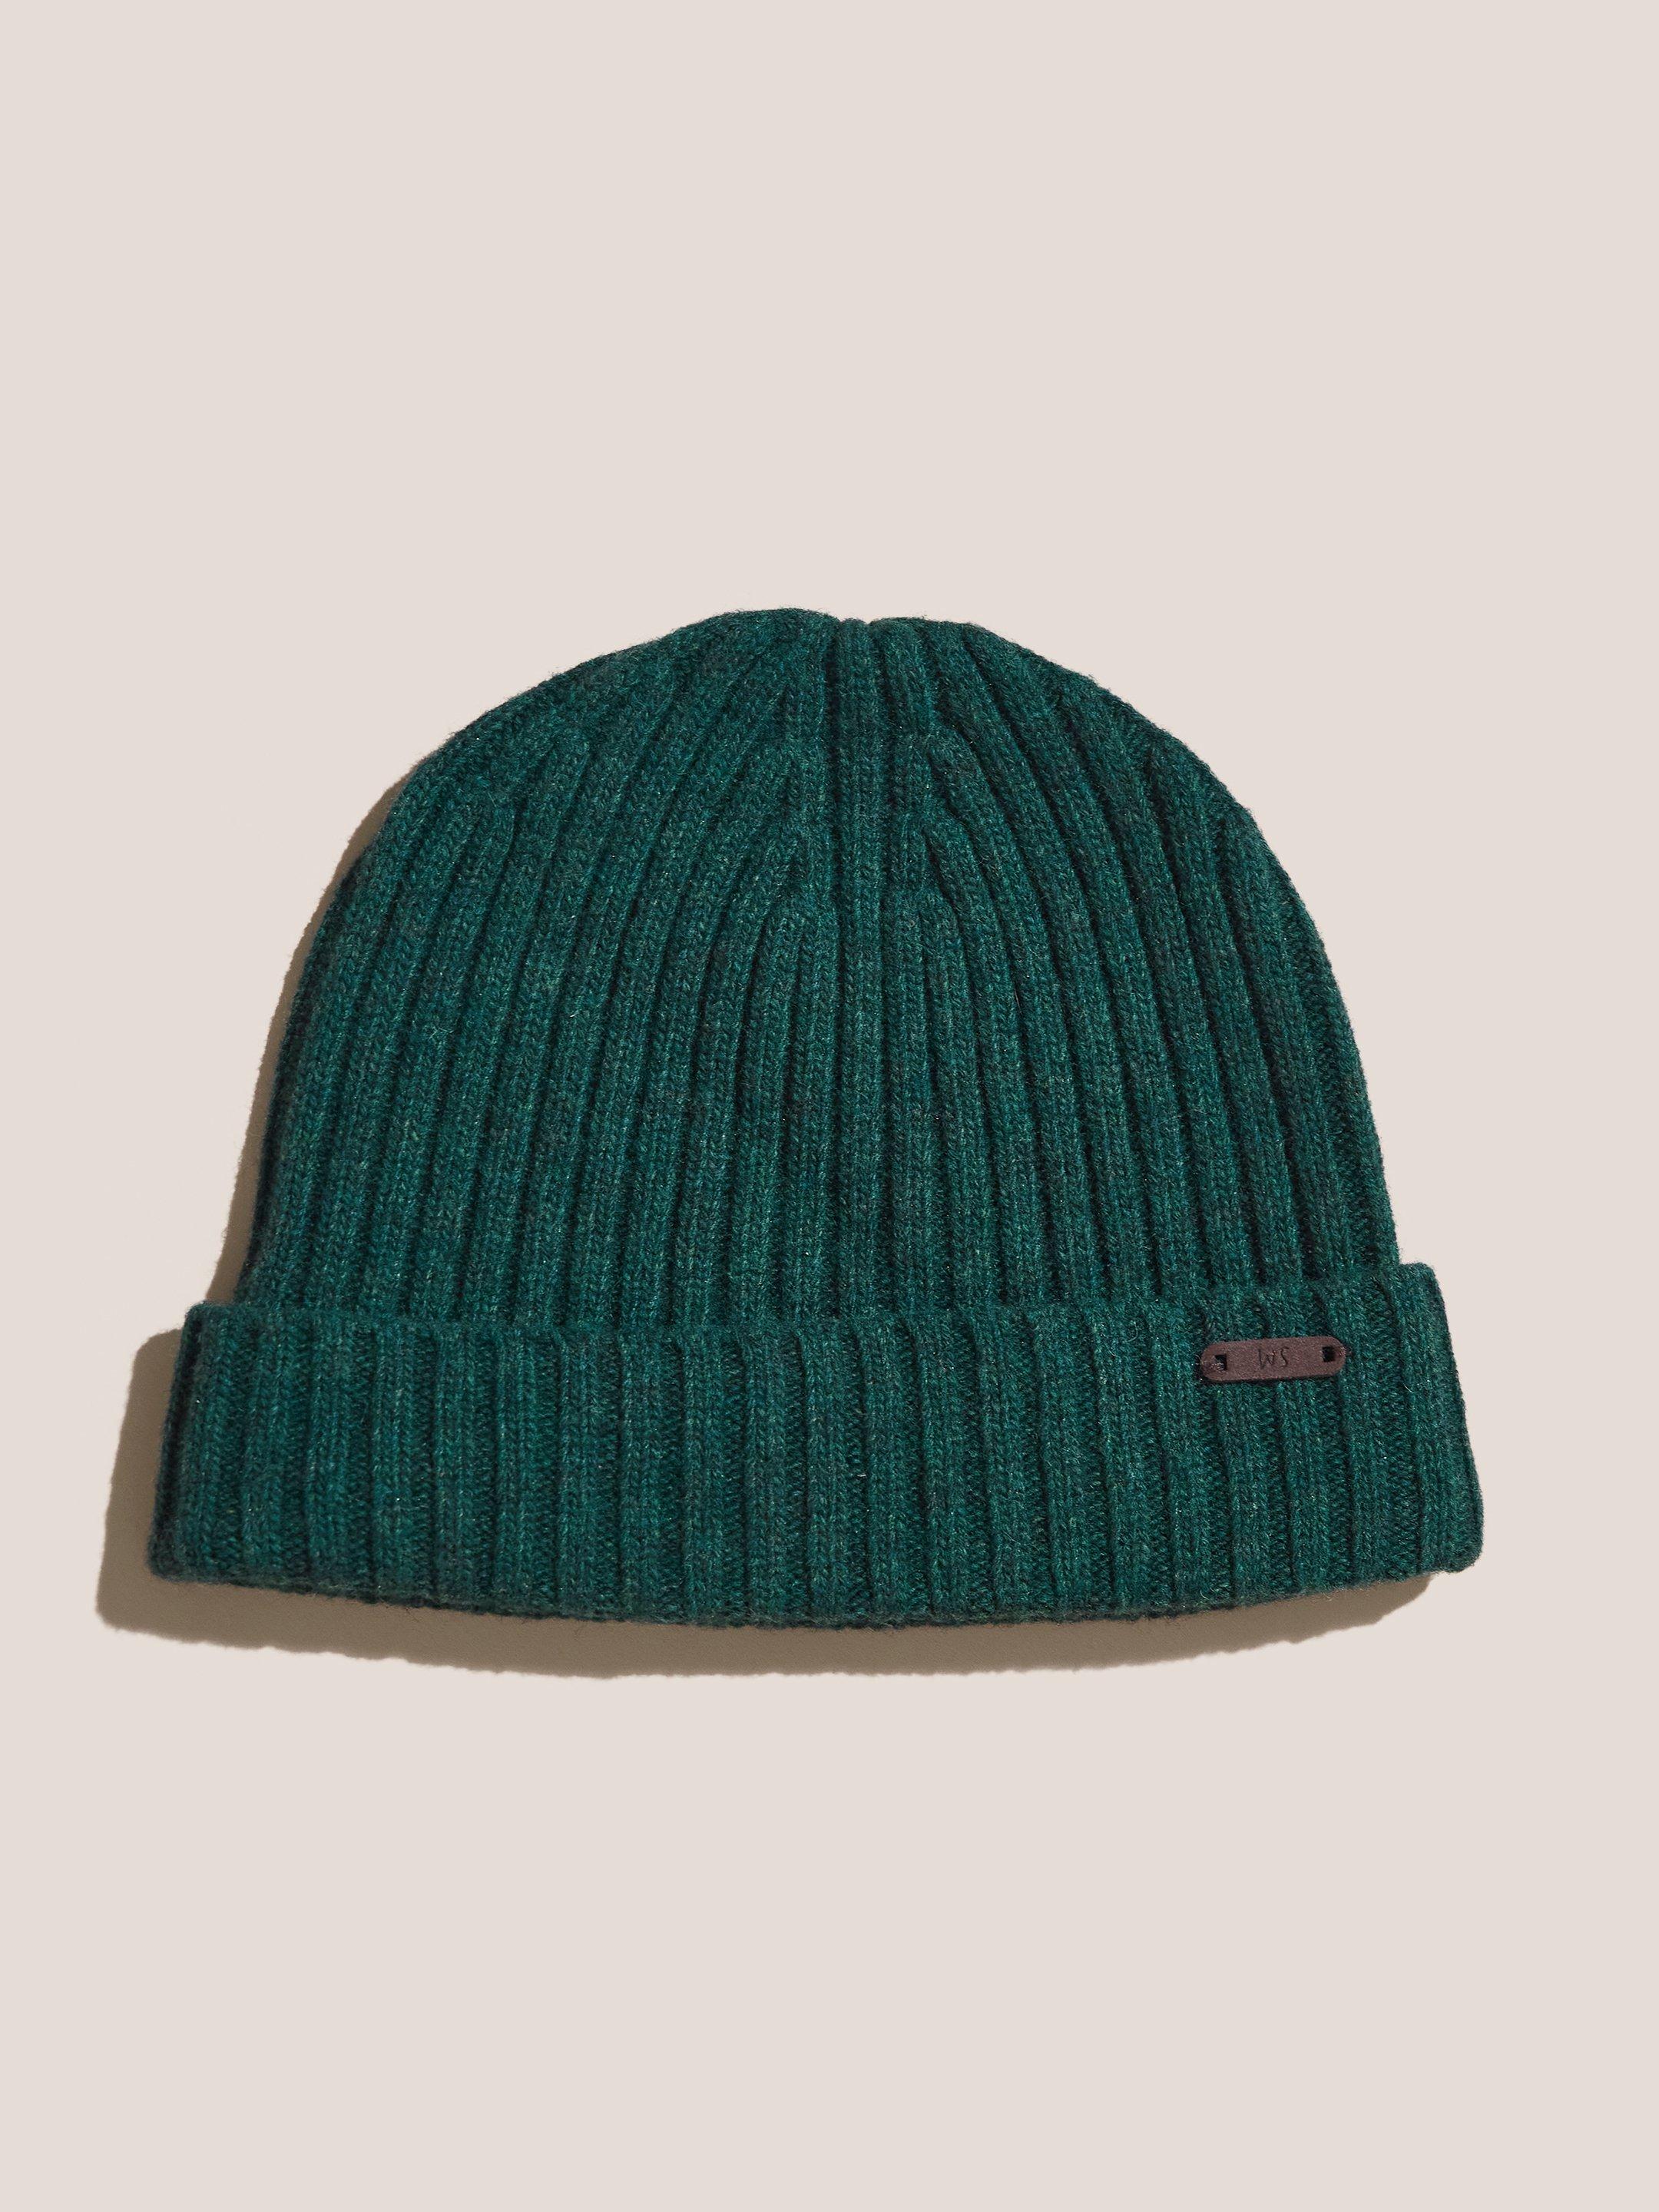 Fisherman Ribbed Beanie in DK GREEN - FLAT FRONT